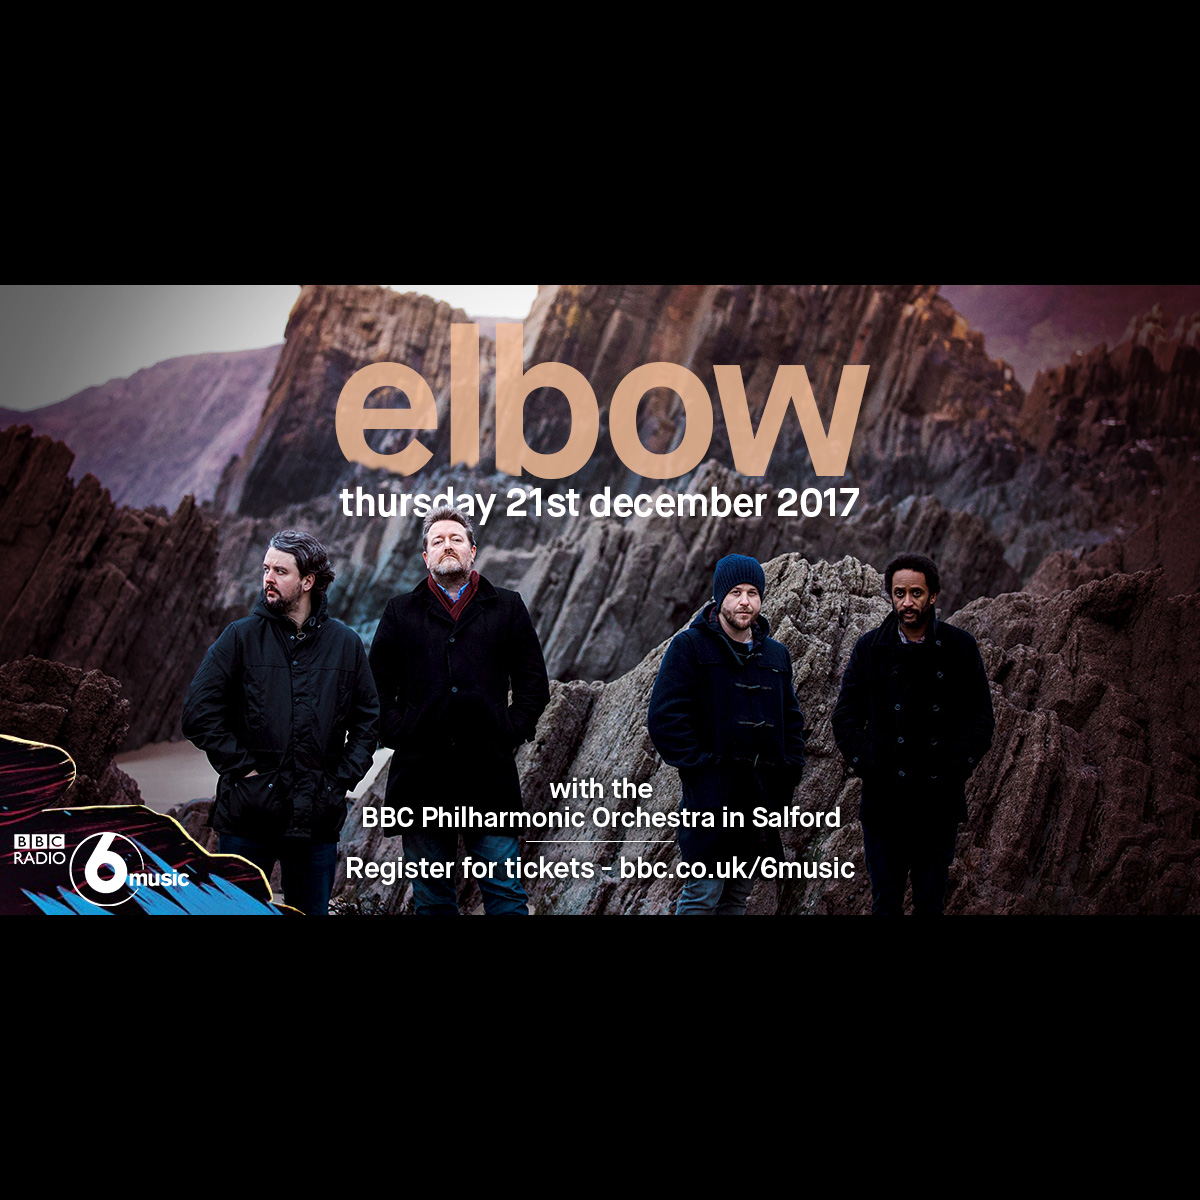 ELBOW ANNOUNCE EXCLUSIVE SHOW WITH BBC PHILHARMONIC ORCHESTRA elbow